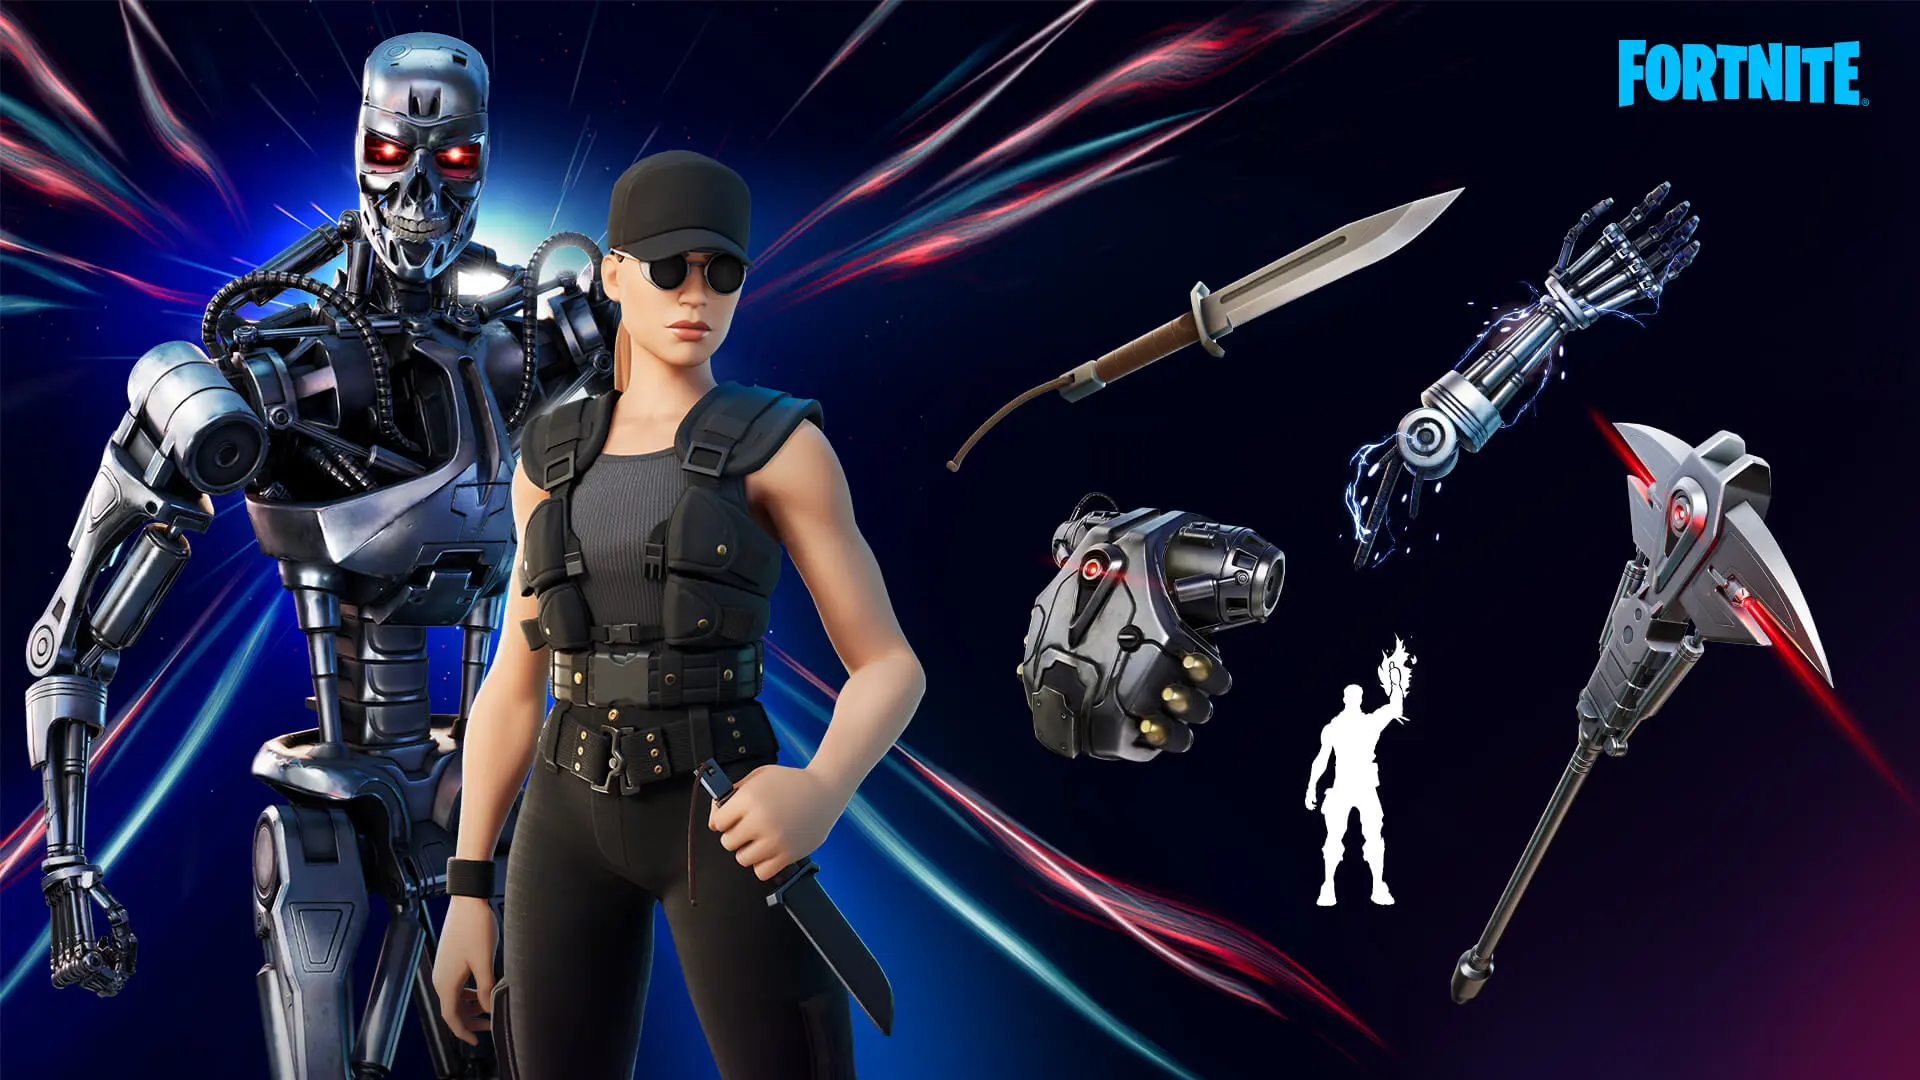 Fortnite and Terminator Team Up for Epic Crossover Event